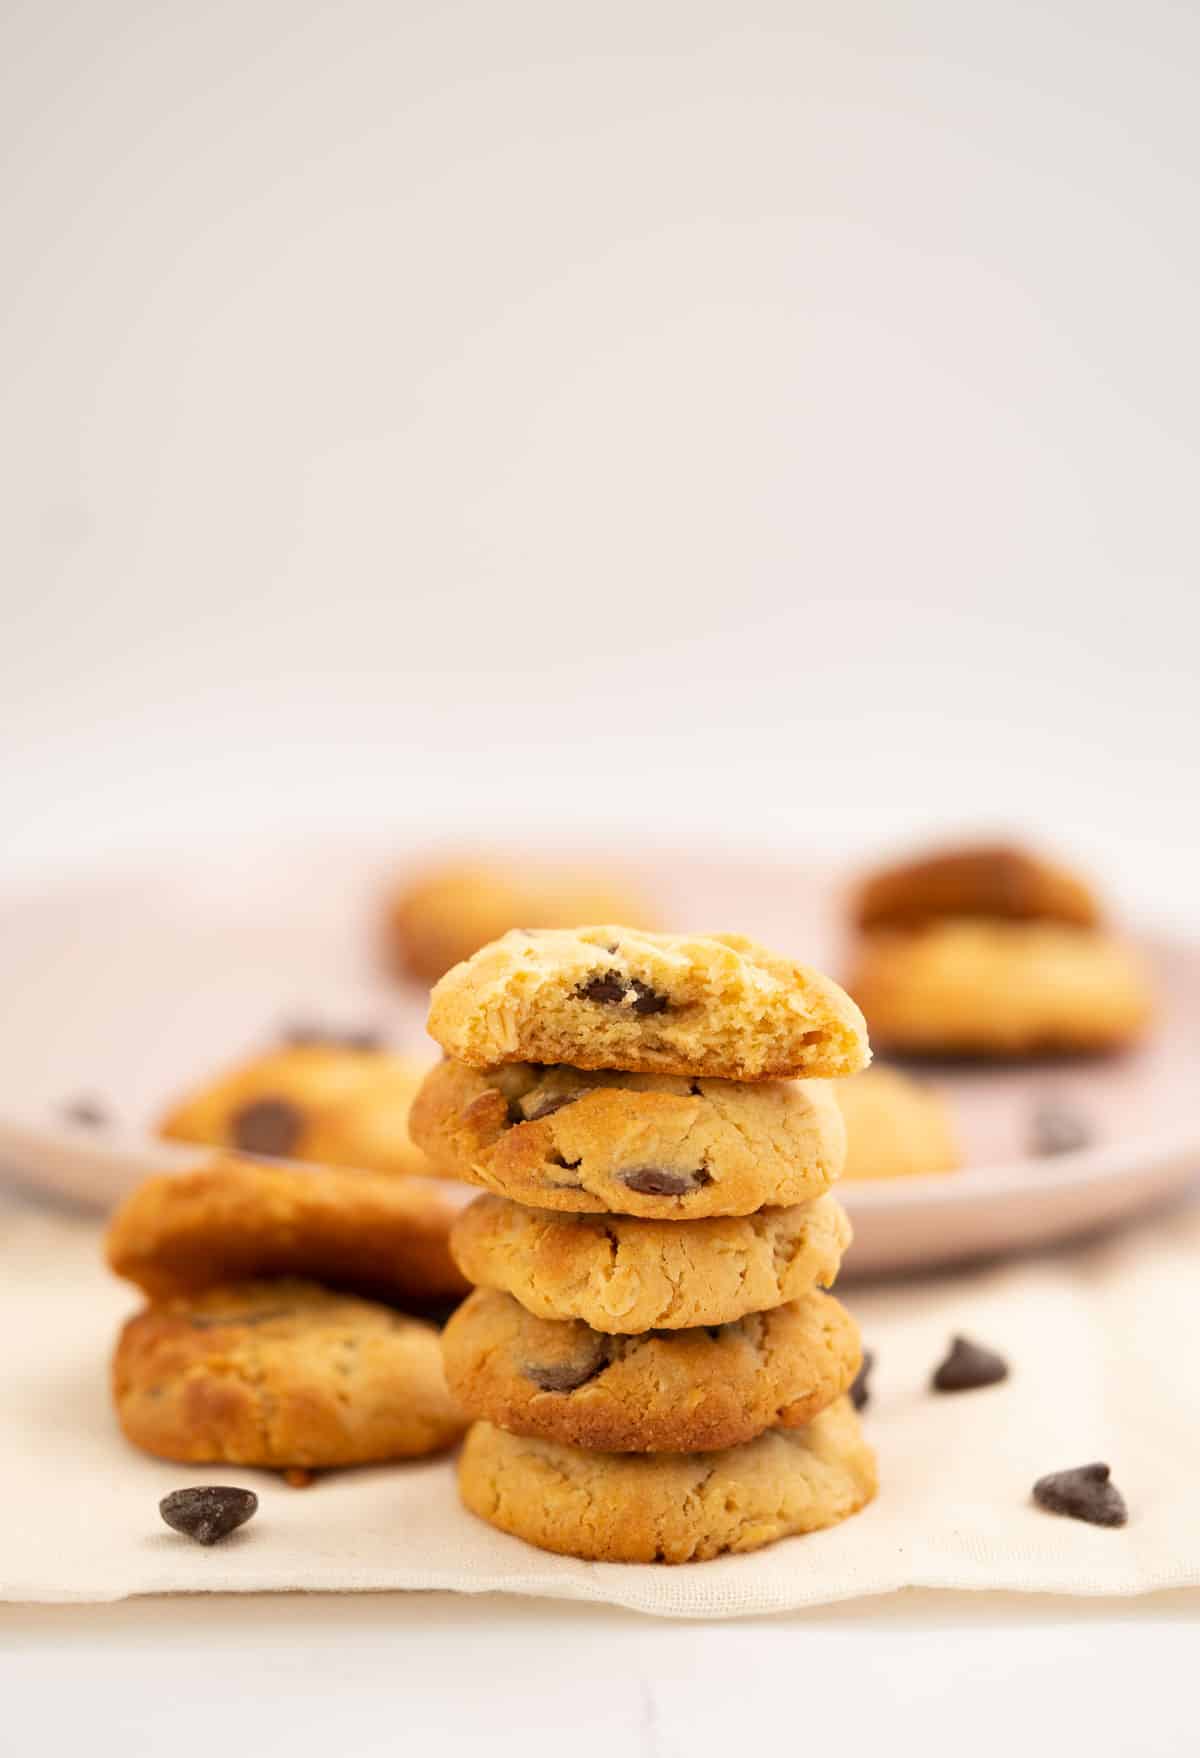 A stack of 5 condensed milk cookies in front of a plat of more cookies.